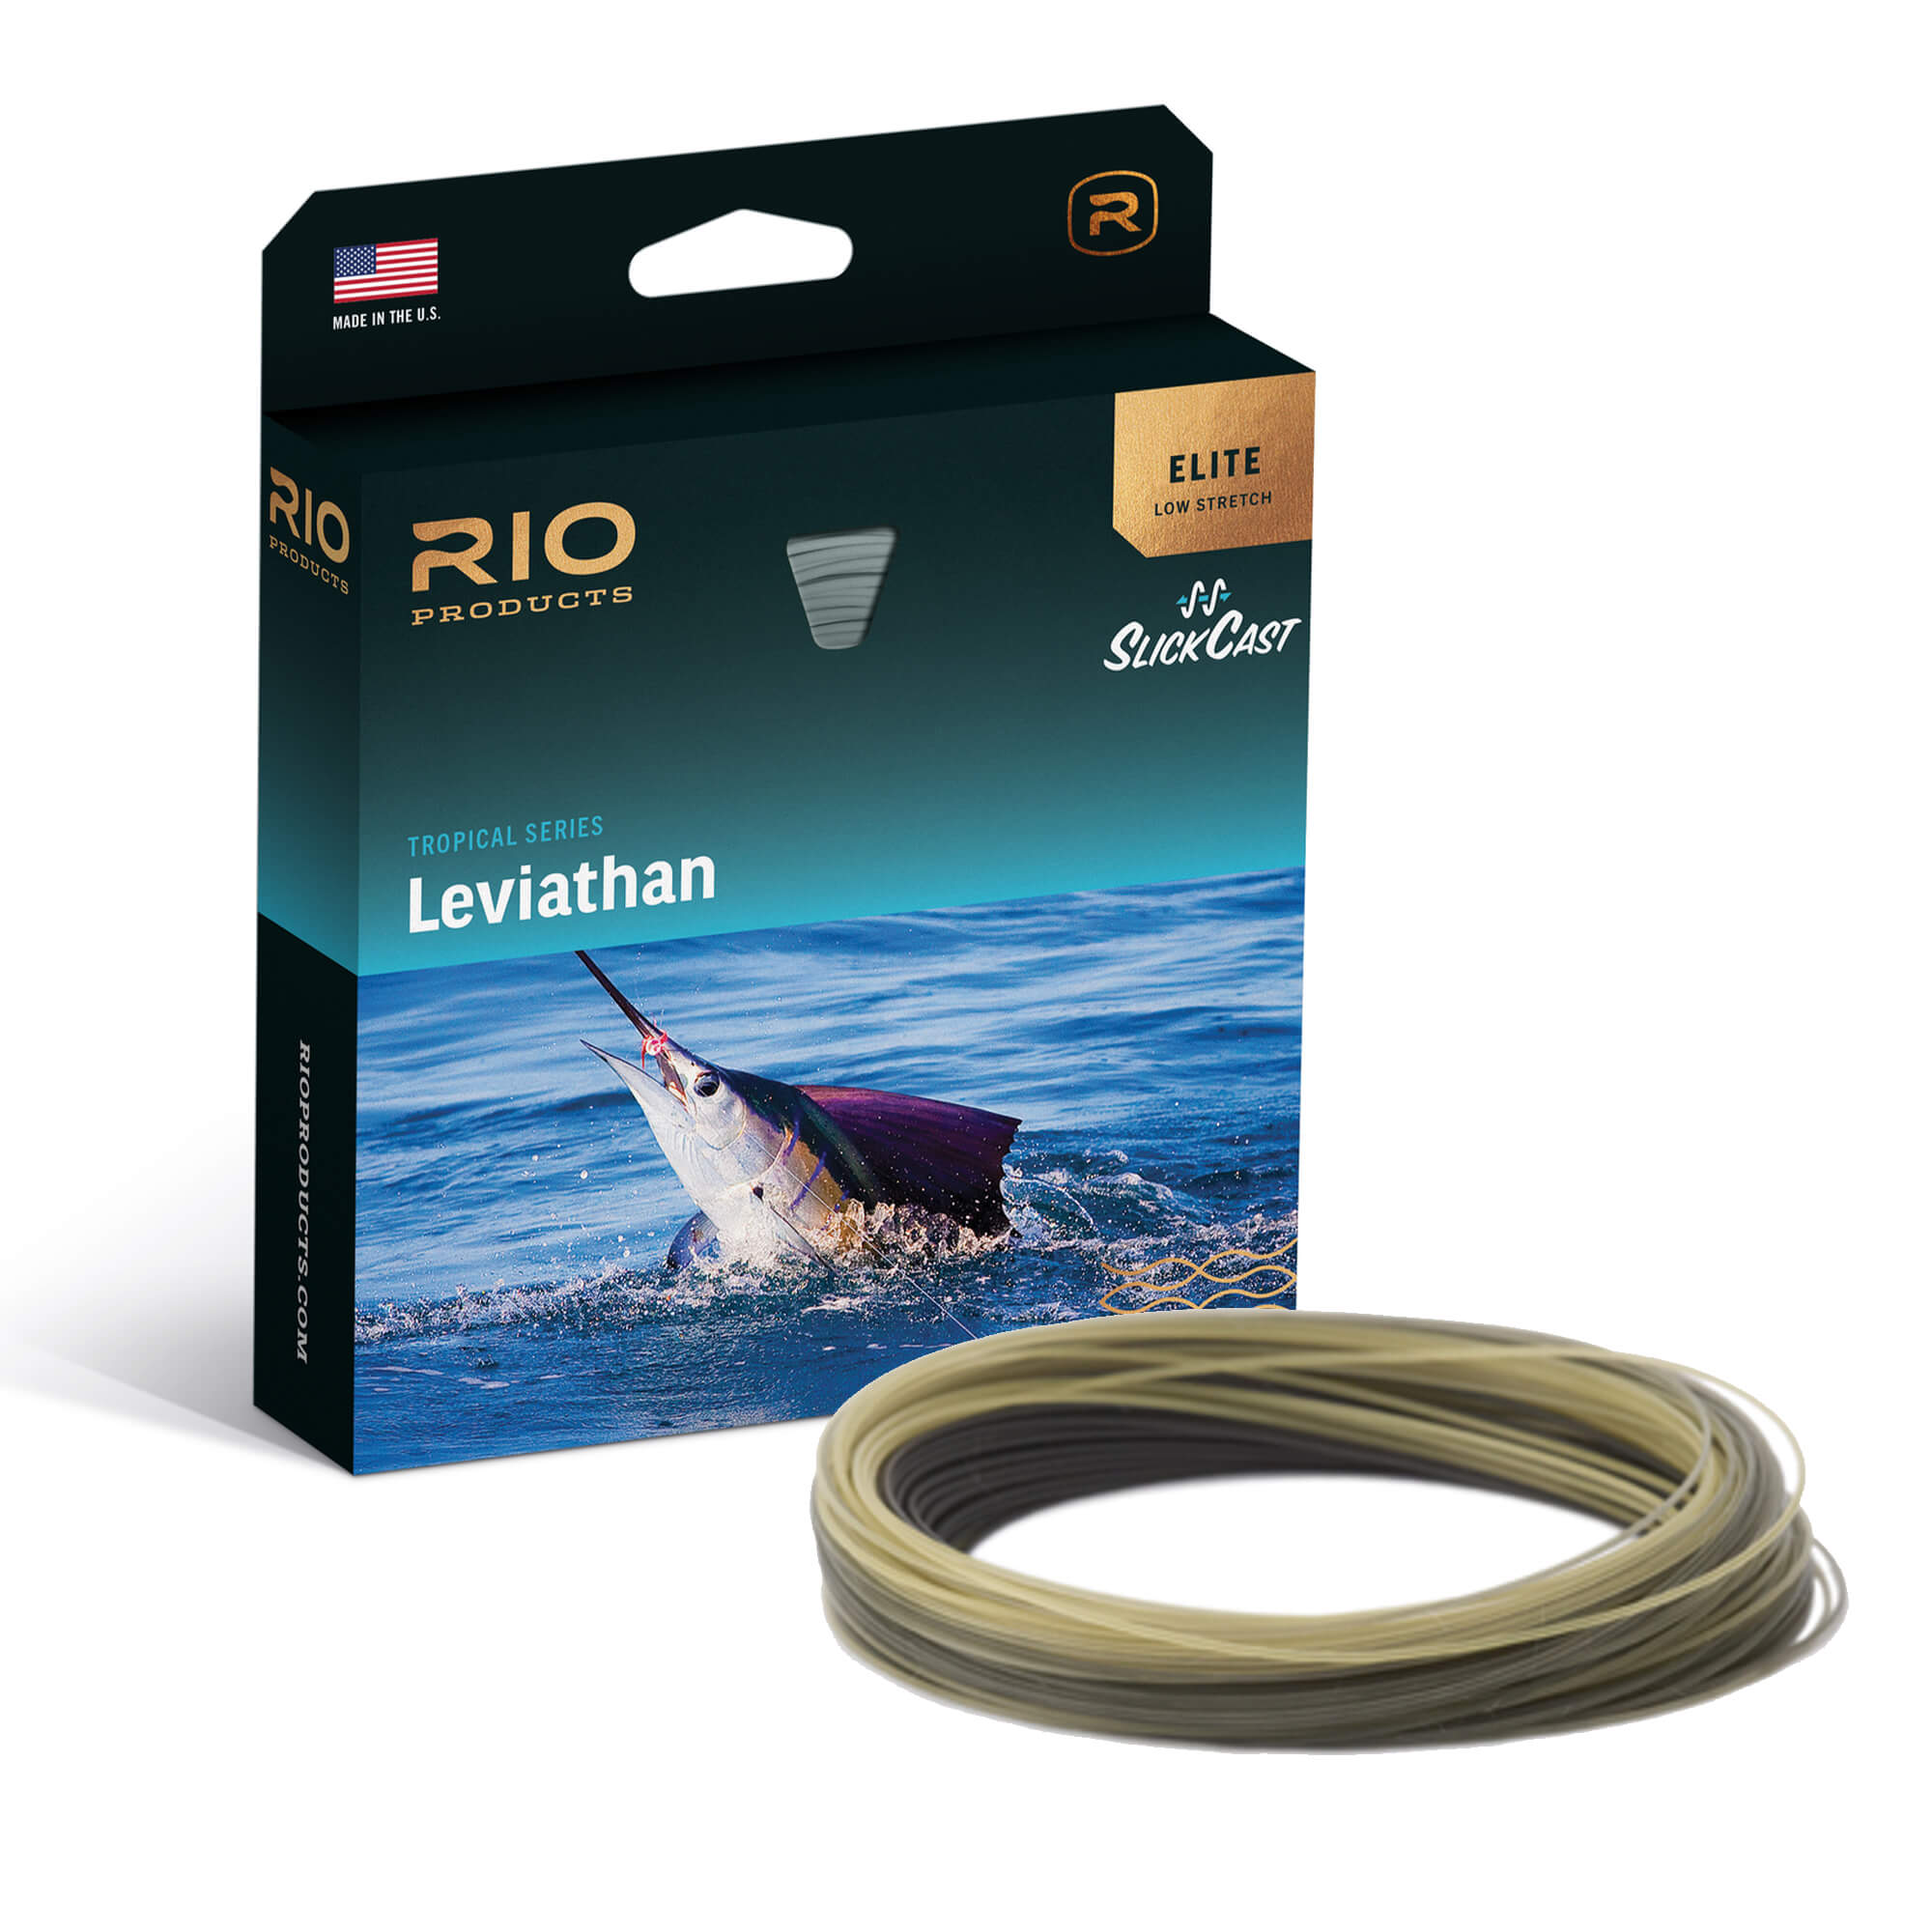 Big Catch Fishing Tackle - RIO Tropical Series Leviathan Saltwater Fly Line